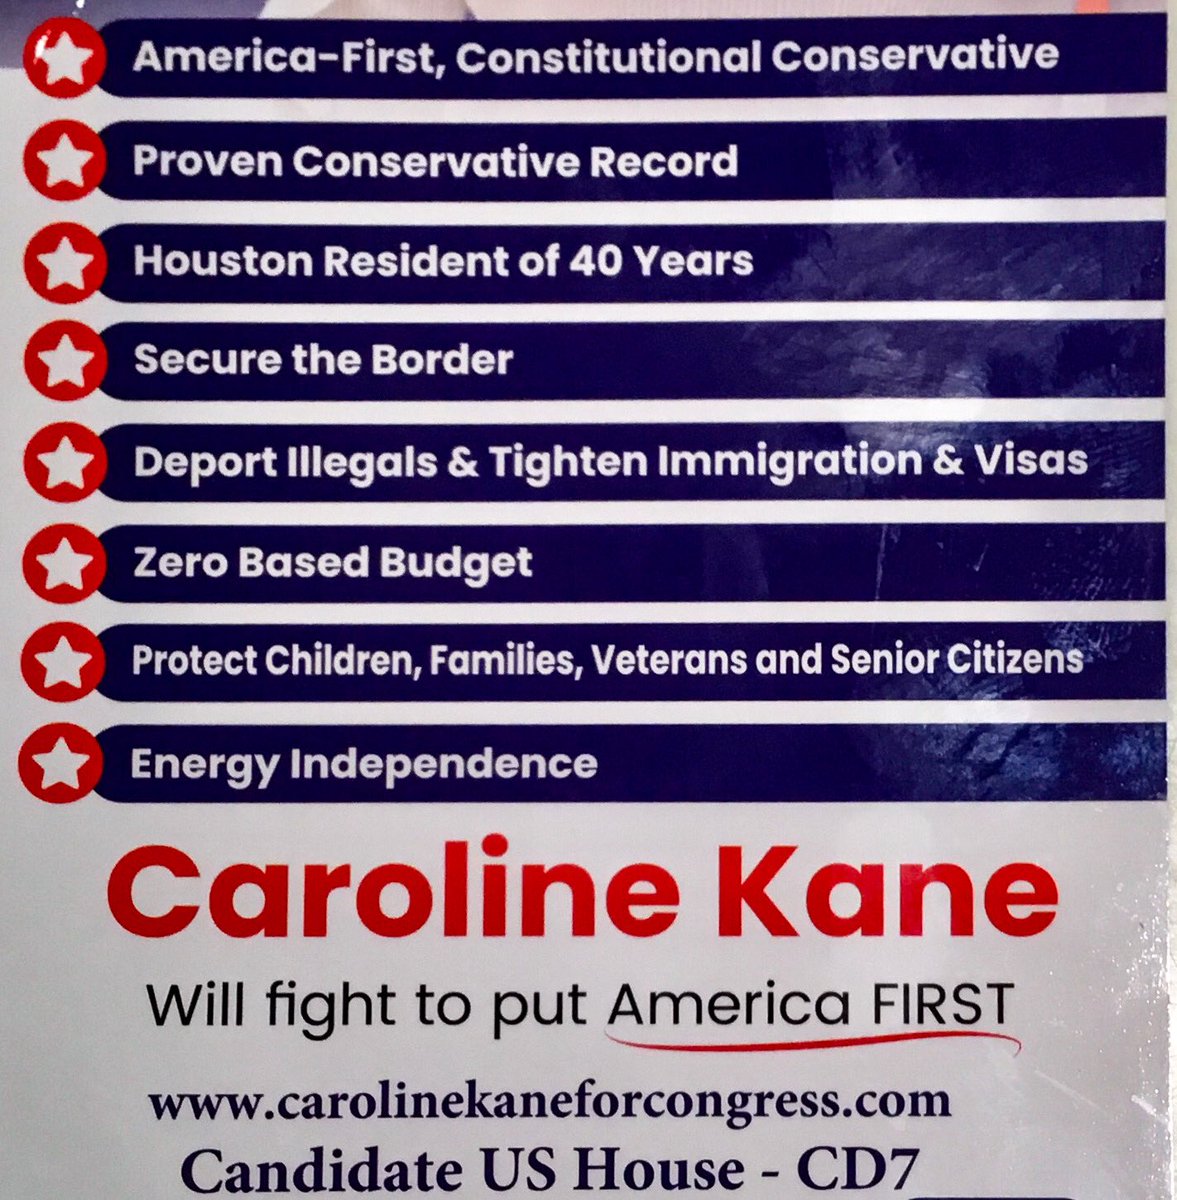 @CarolineKaneTX Caroline, You are most welcome!! 😃 I’m looking forward to meeting you on May 15th at your Get Out The Vote Meet and Greet. 😎👍